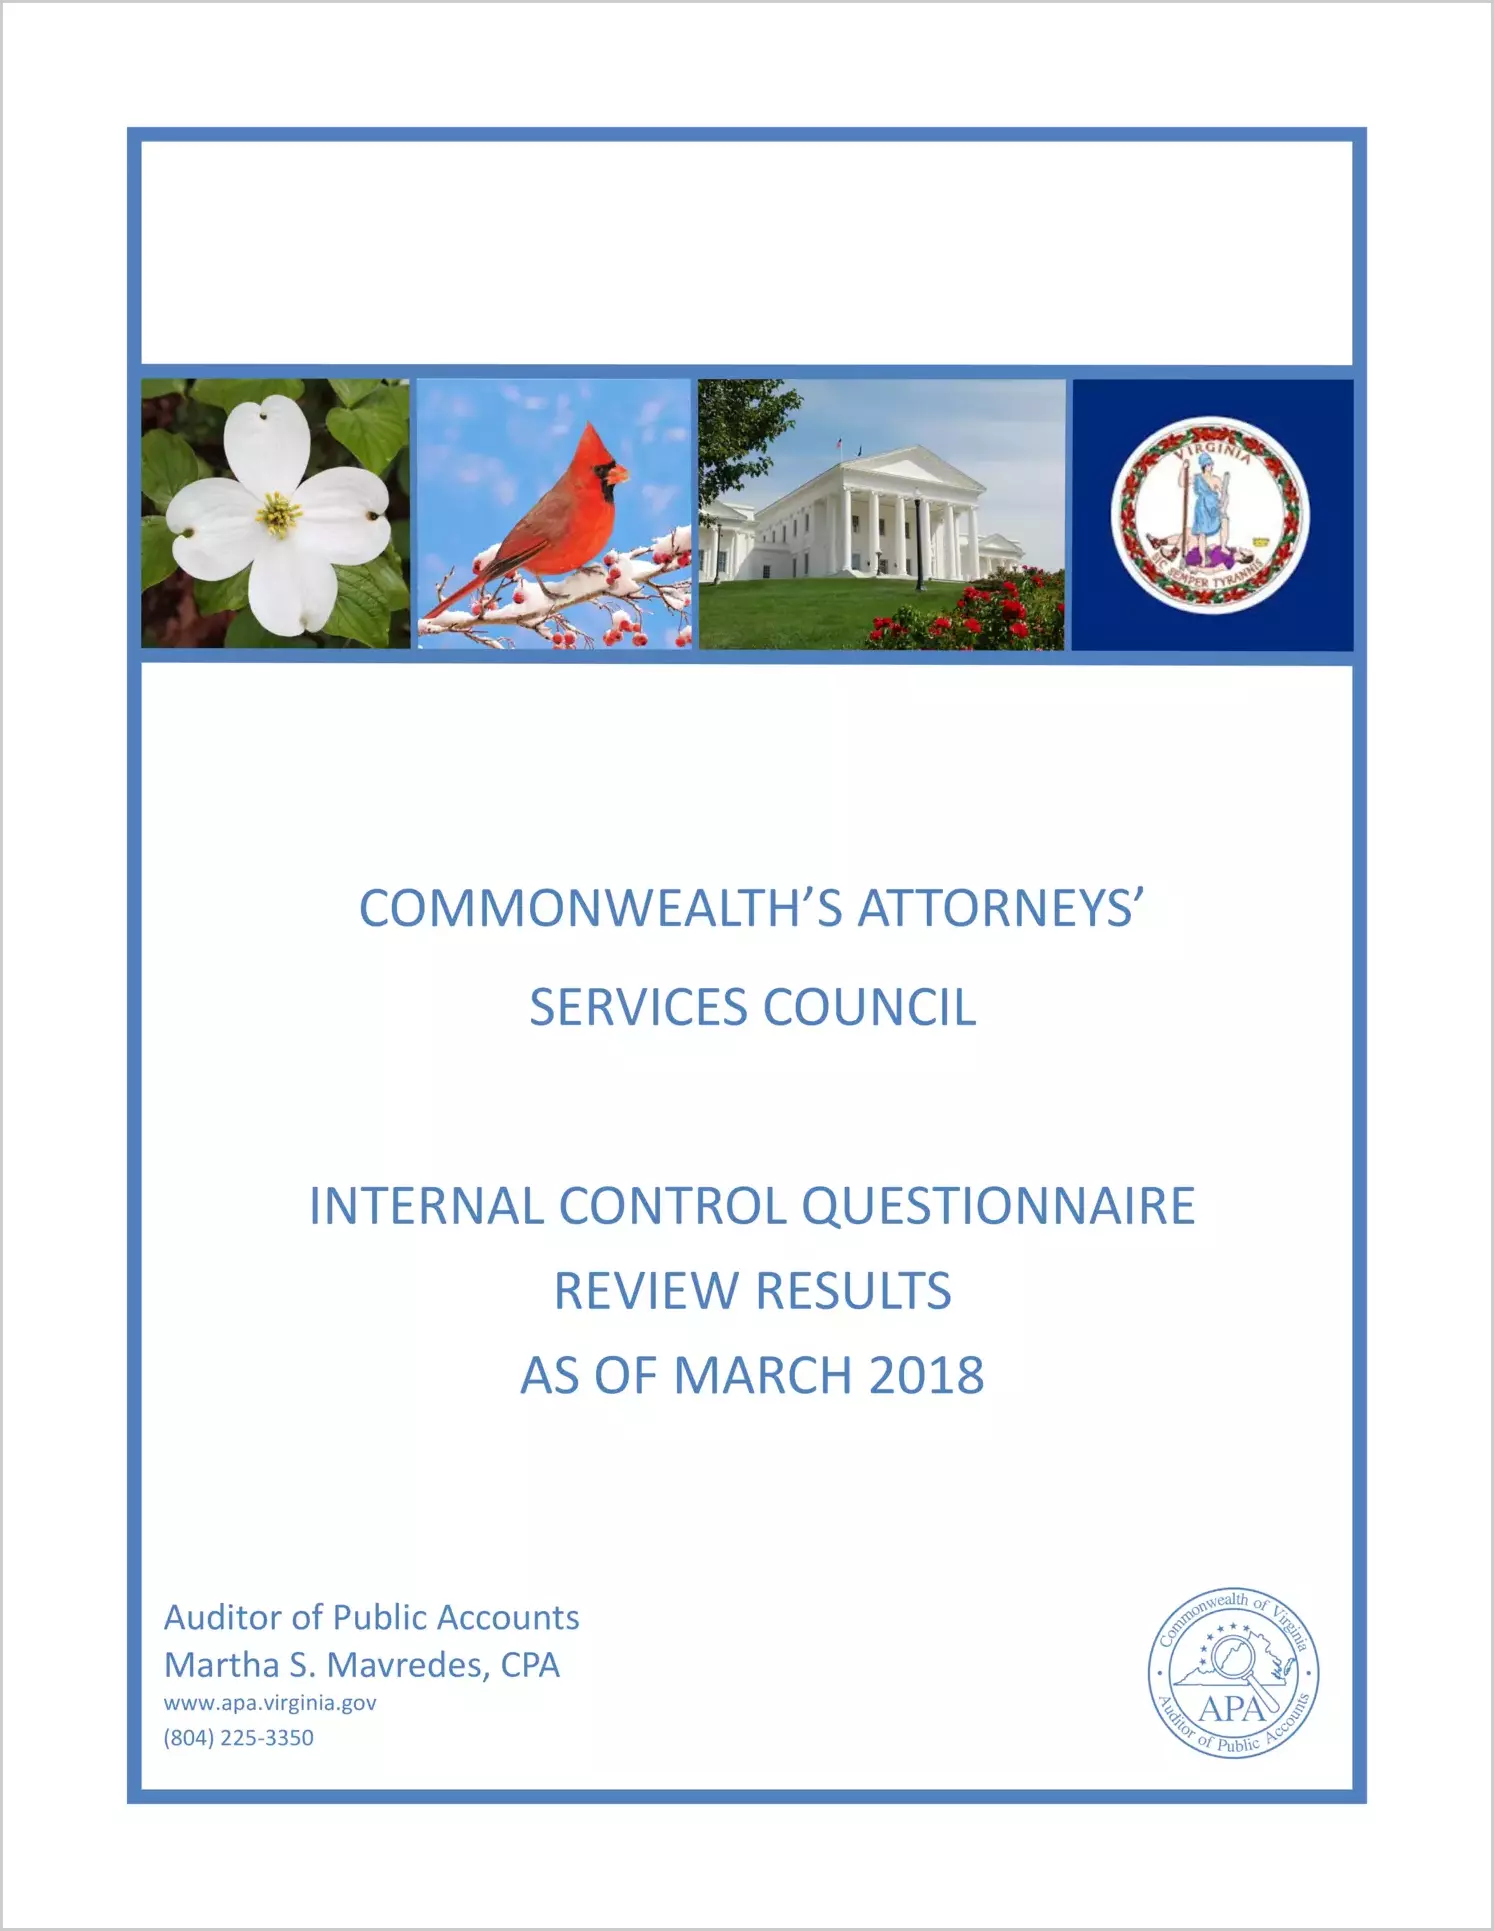 Commonwealth's Attorney's Services Council Internal Control Questionnaire Review Results as of March 2018